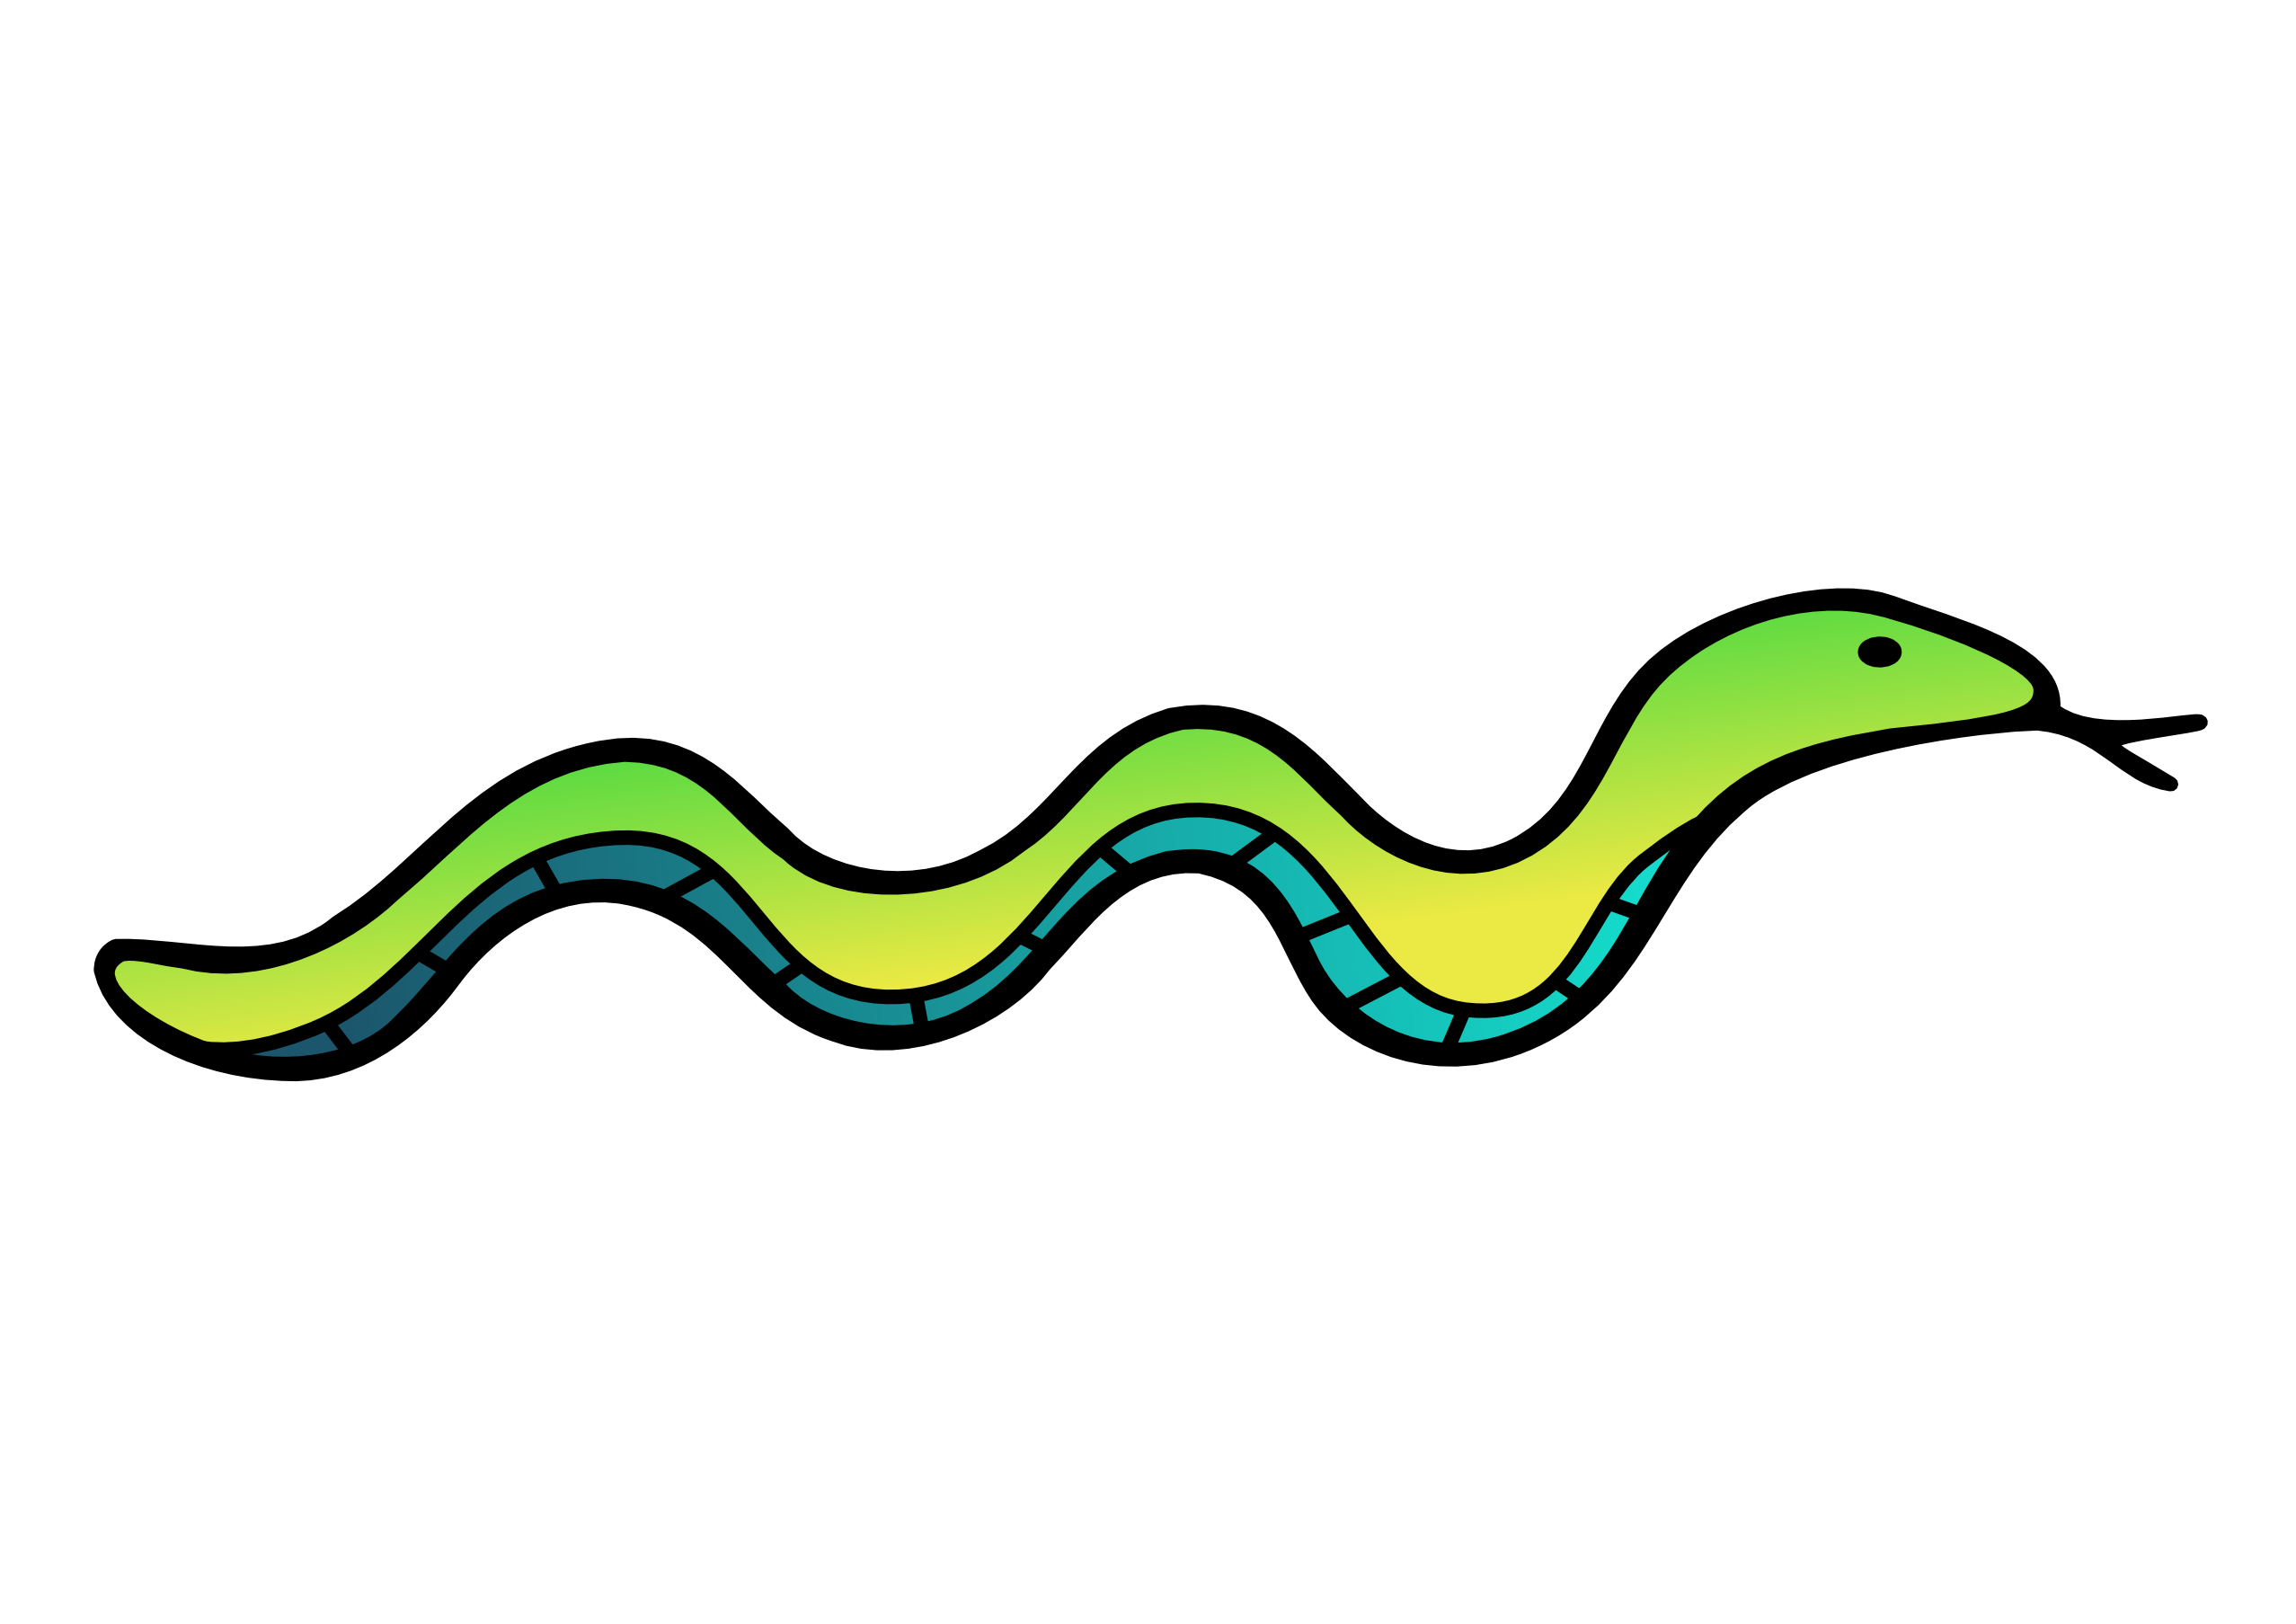 Free Cartoon Snake Clipart, Download Free Clip Art, Free.